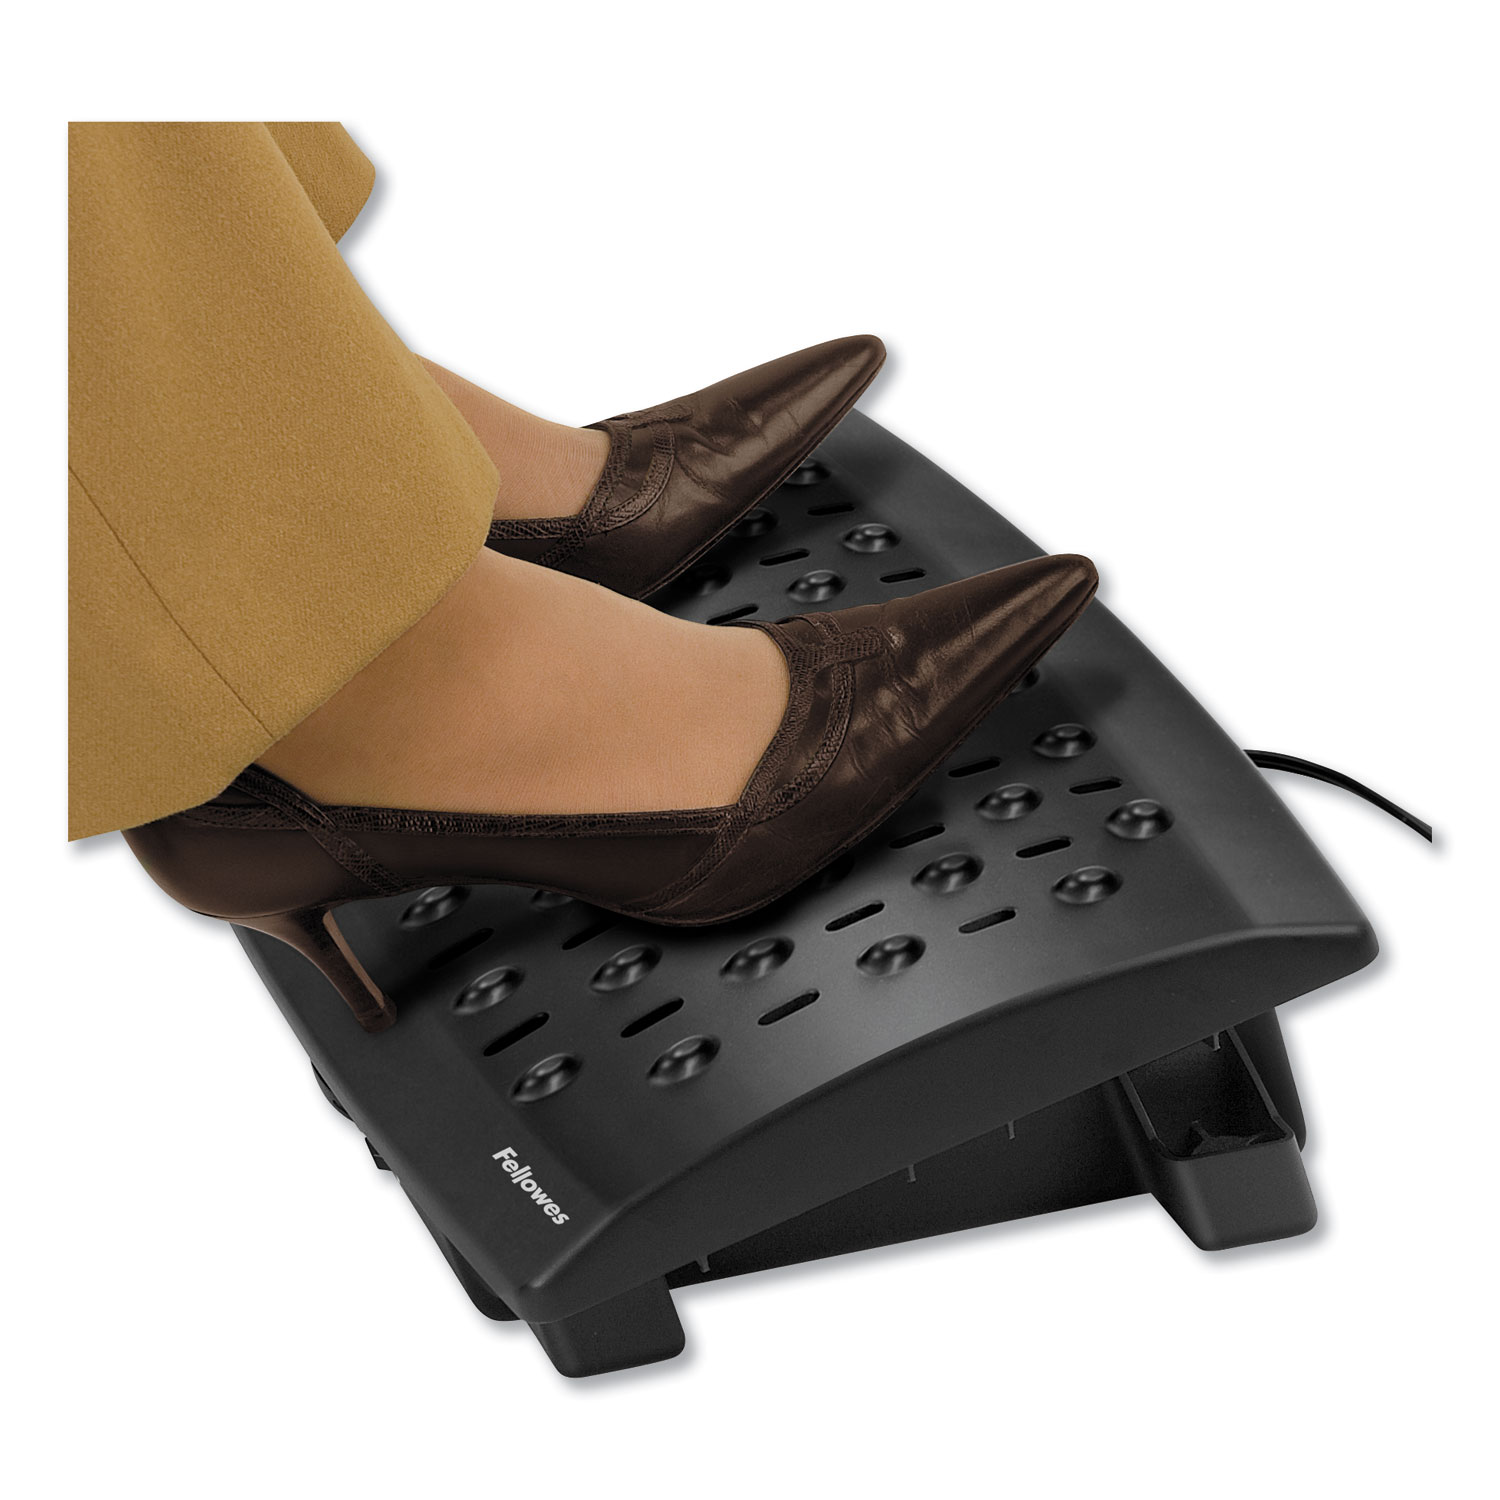 Toasty Toes Ergonomic Heated Foot Rest